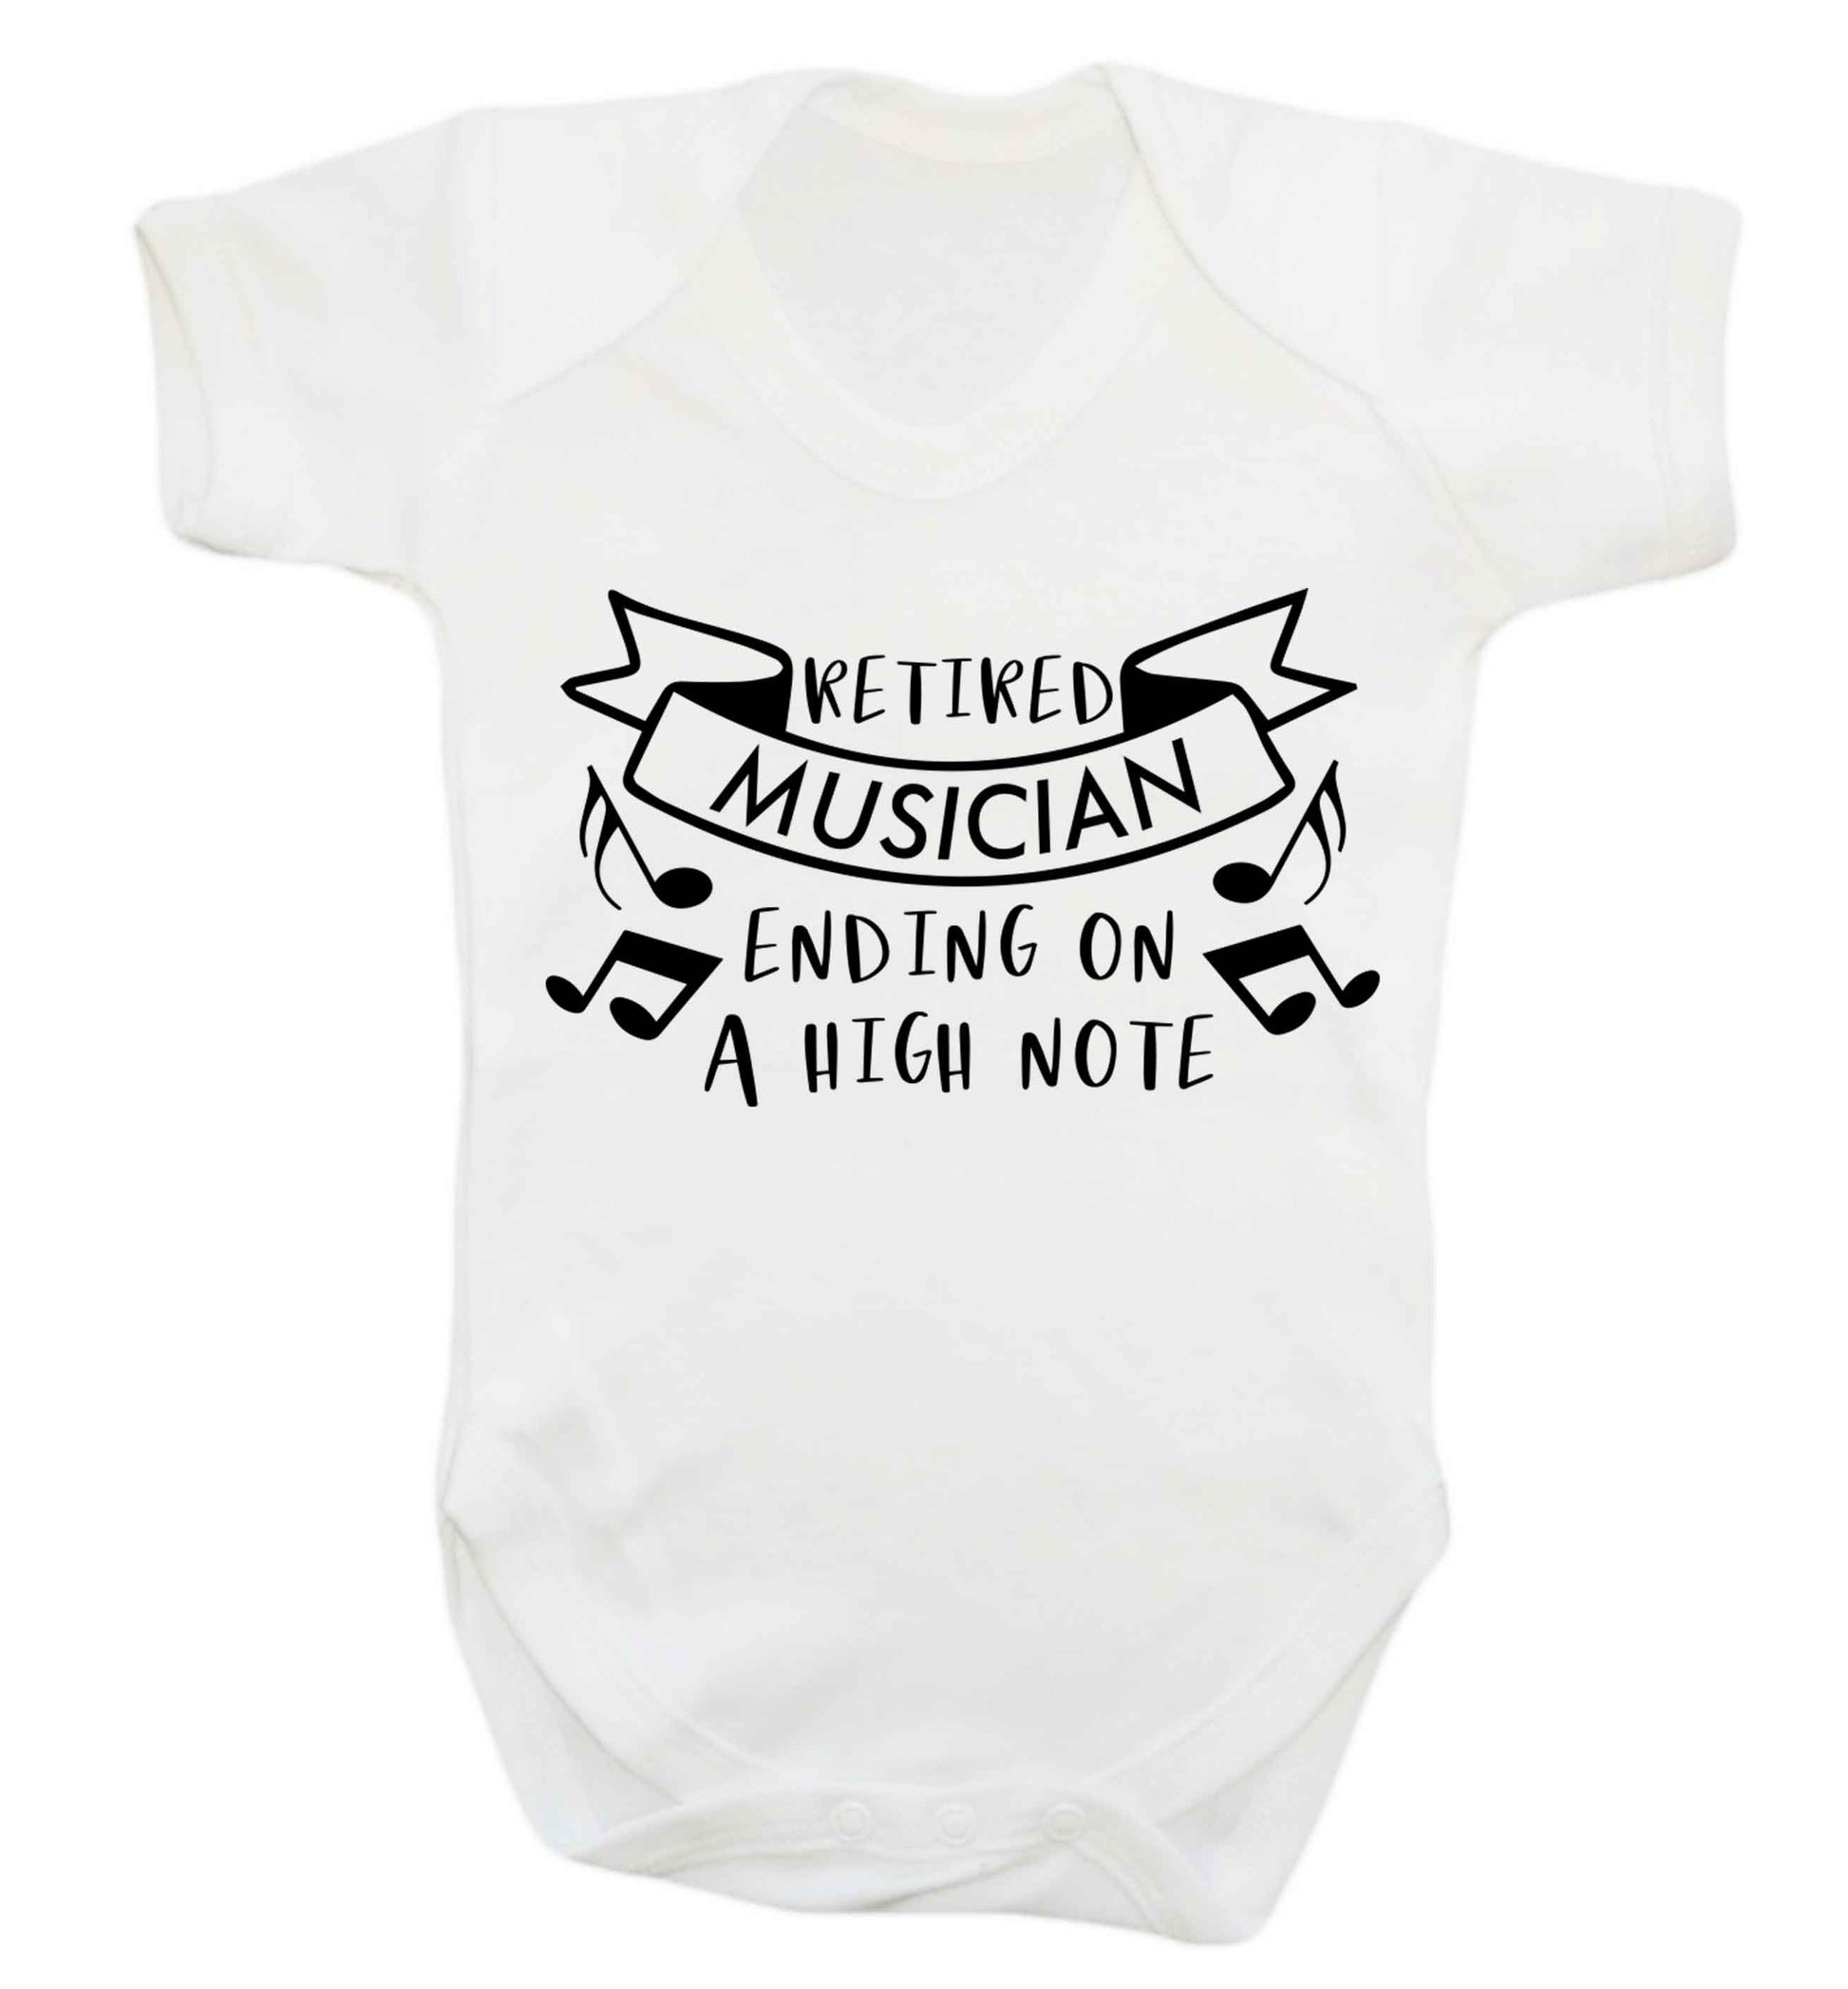 Retired musician ending on a high note Baby Vest white 18-24 months